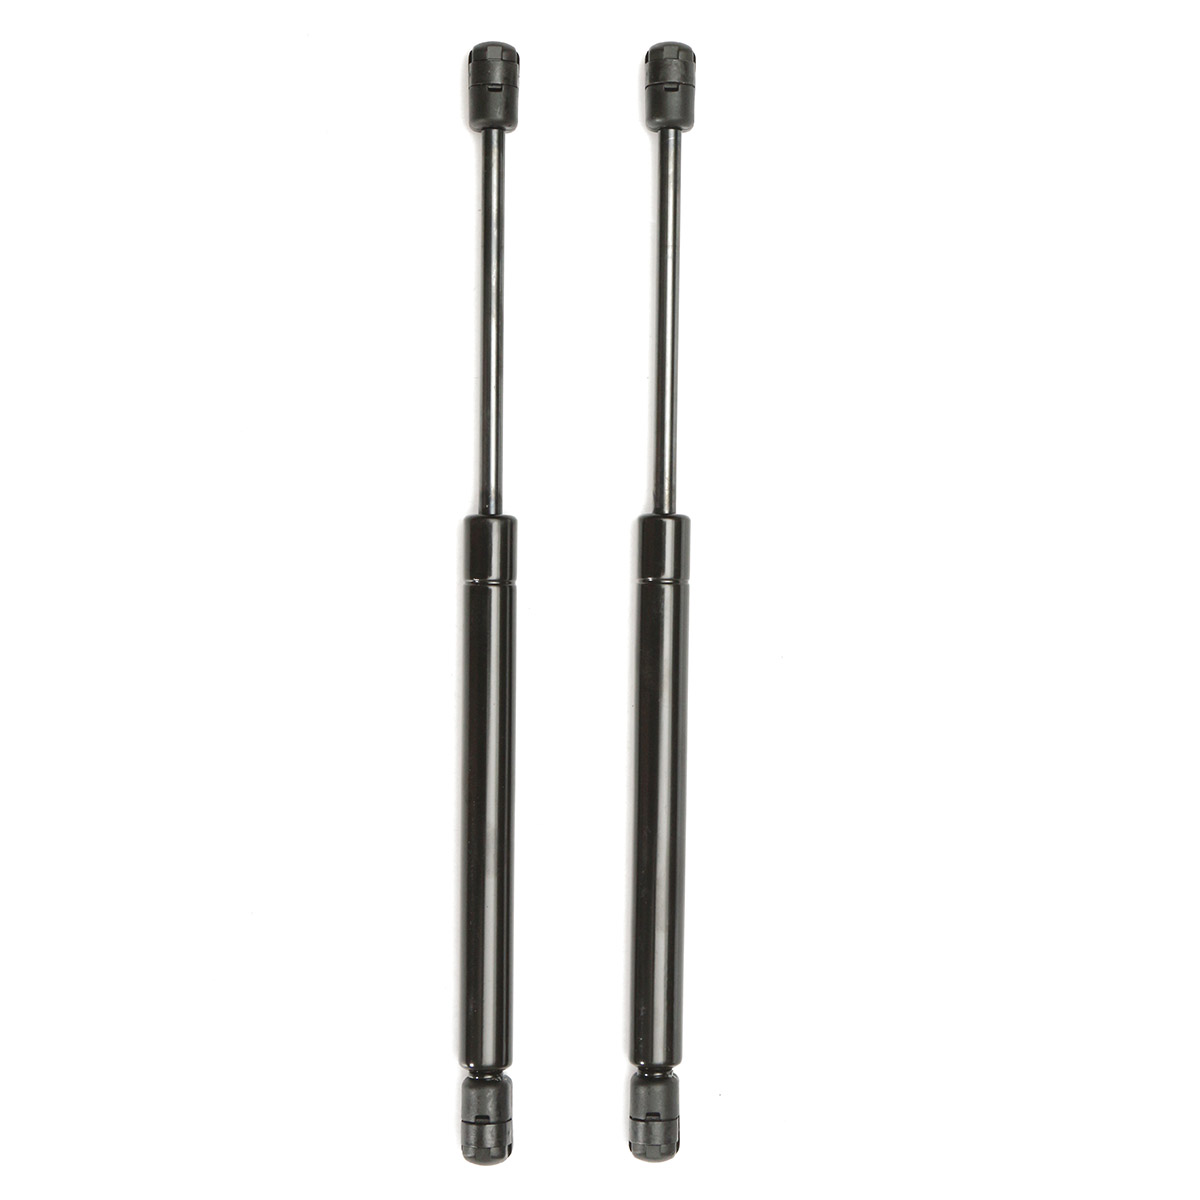 One-Pair-Rear-Tailgate-Boot-Trunk-Gas-Struts-For-Mercedes-SLK-R170-Convertible-96-04-1240551